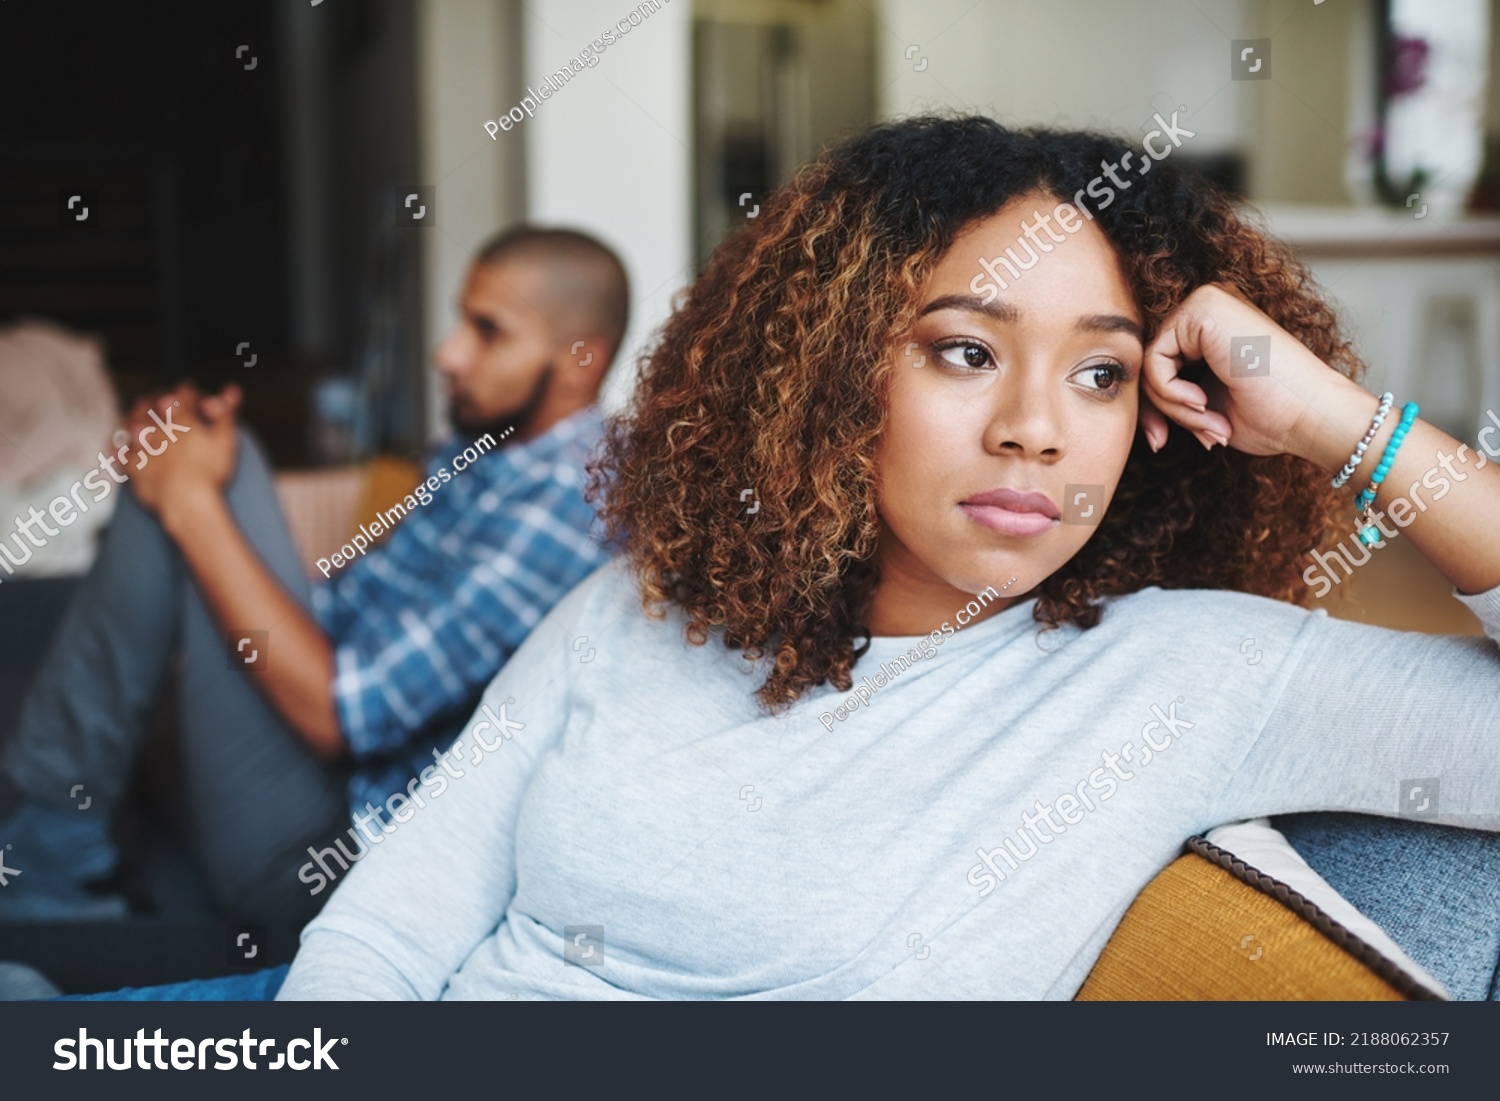 Unhappy couple and sad woman upset after argument or conflict with her man on home sofa. Angry girlfriend or female thinking about disagreement or ignoring partner, tired of relationship problems. #2188062357